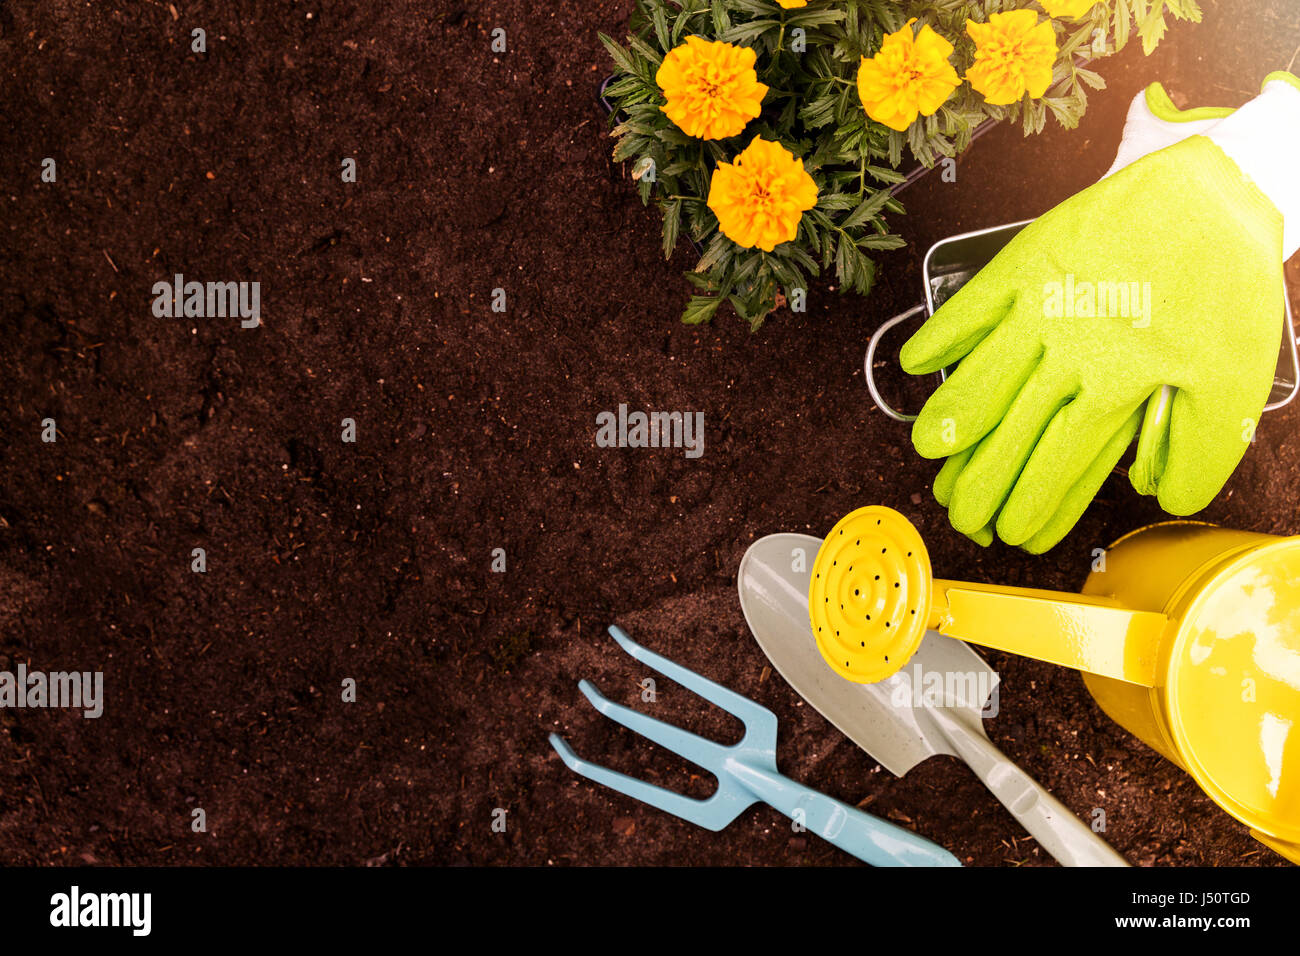 gardening tools and marigold flowers on soil background with copy space Stock Photo